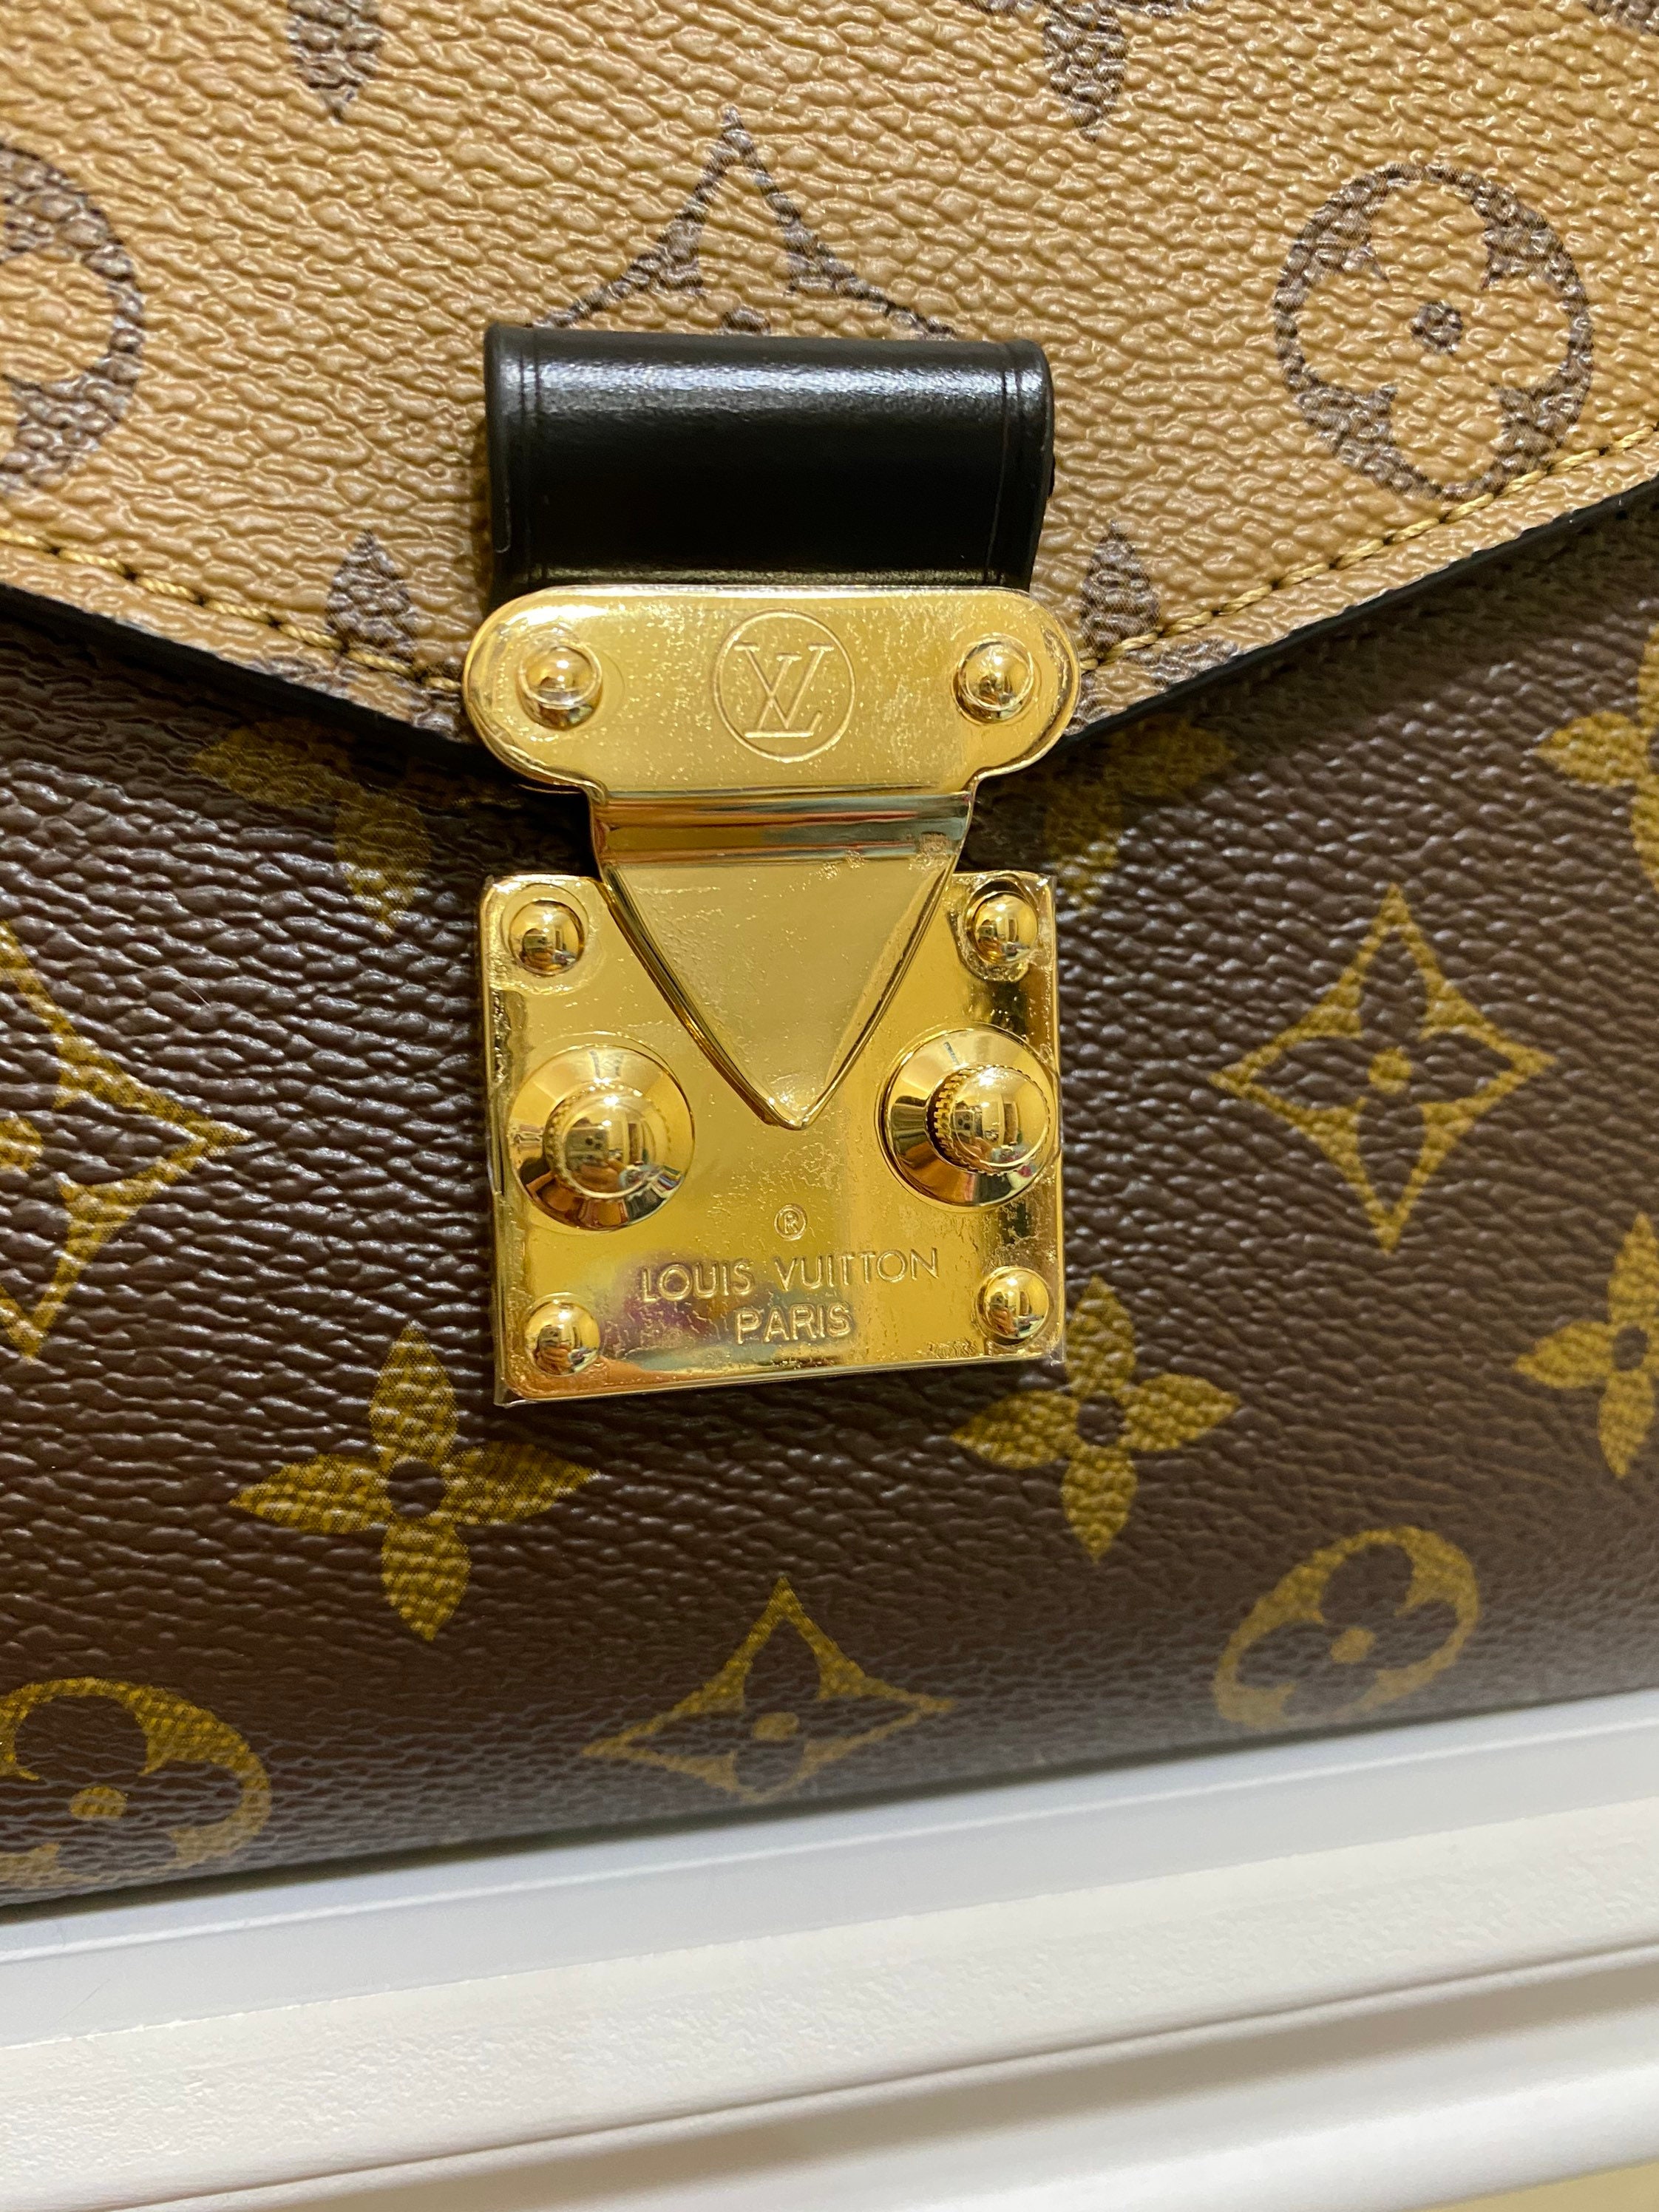 POCHETTE METIS. HELP! The gold looks peeled off!